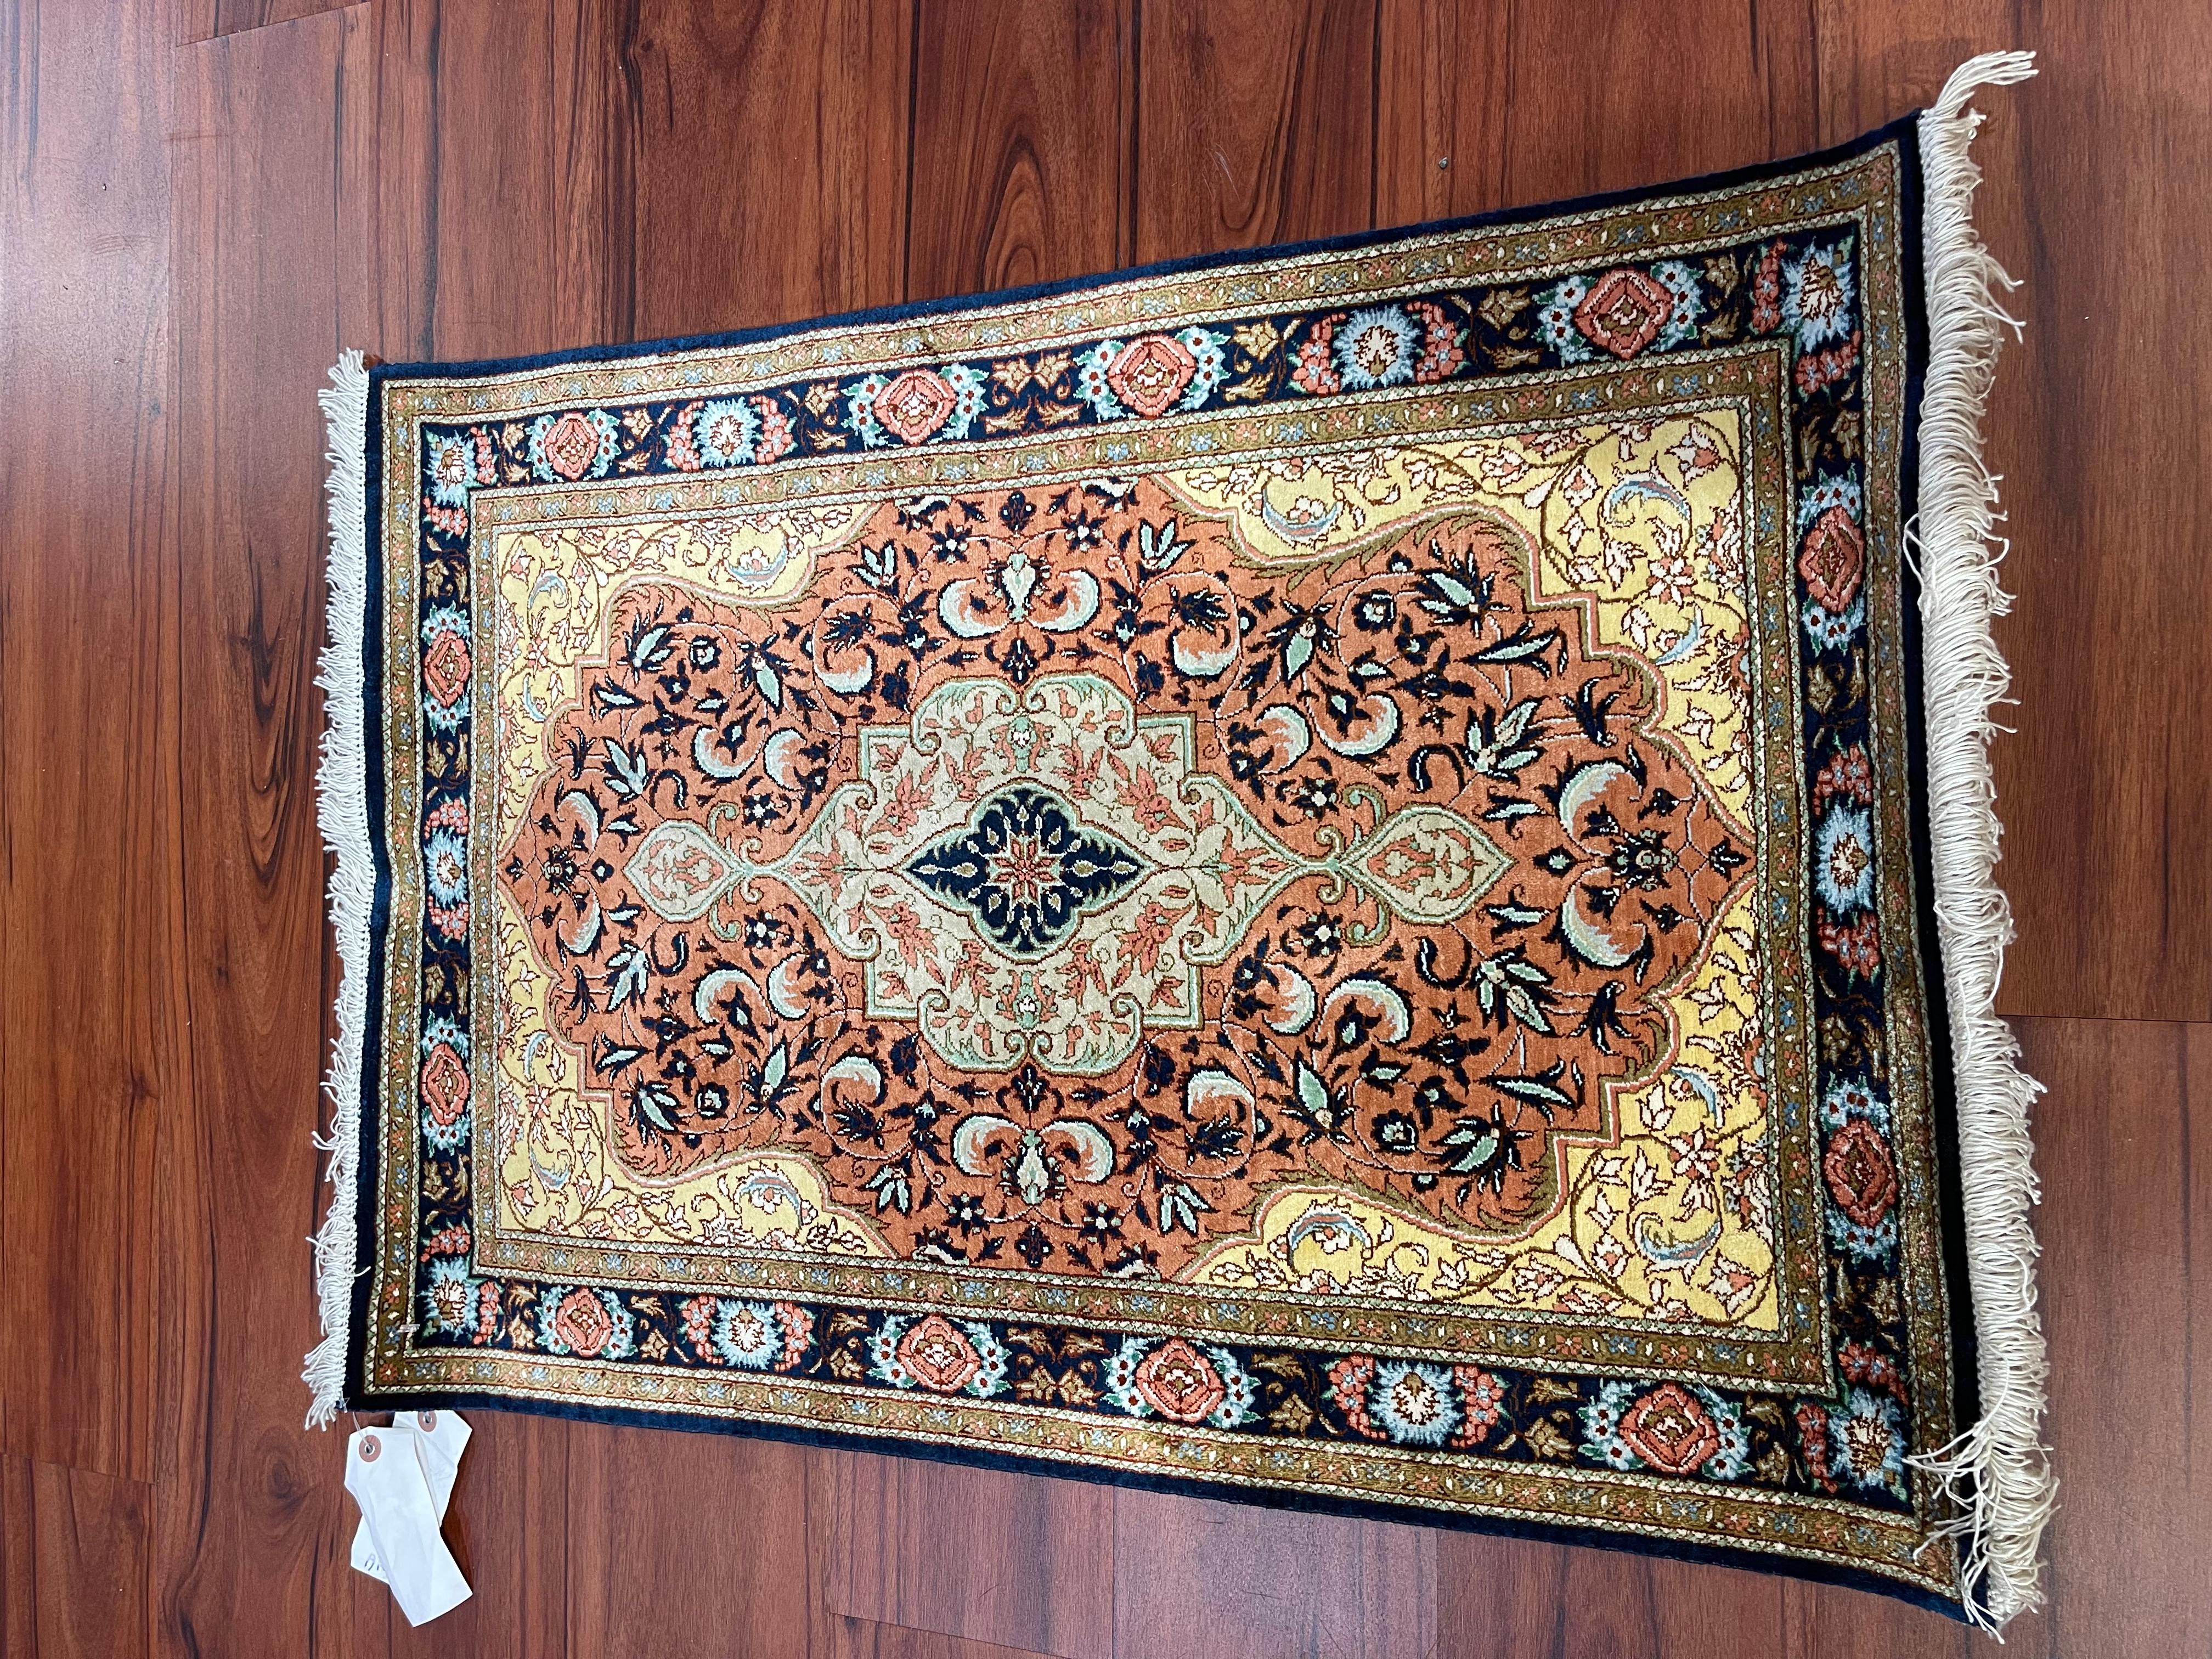 A Stunning 100% silk Persian Qum Rug originated from Iran in the late 20th century. This piece is hand-knotted and in excellent condition. Feel free to Message me for any questions or offers!